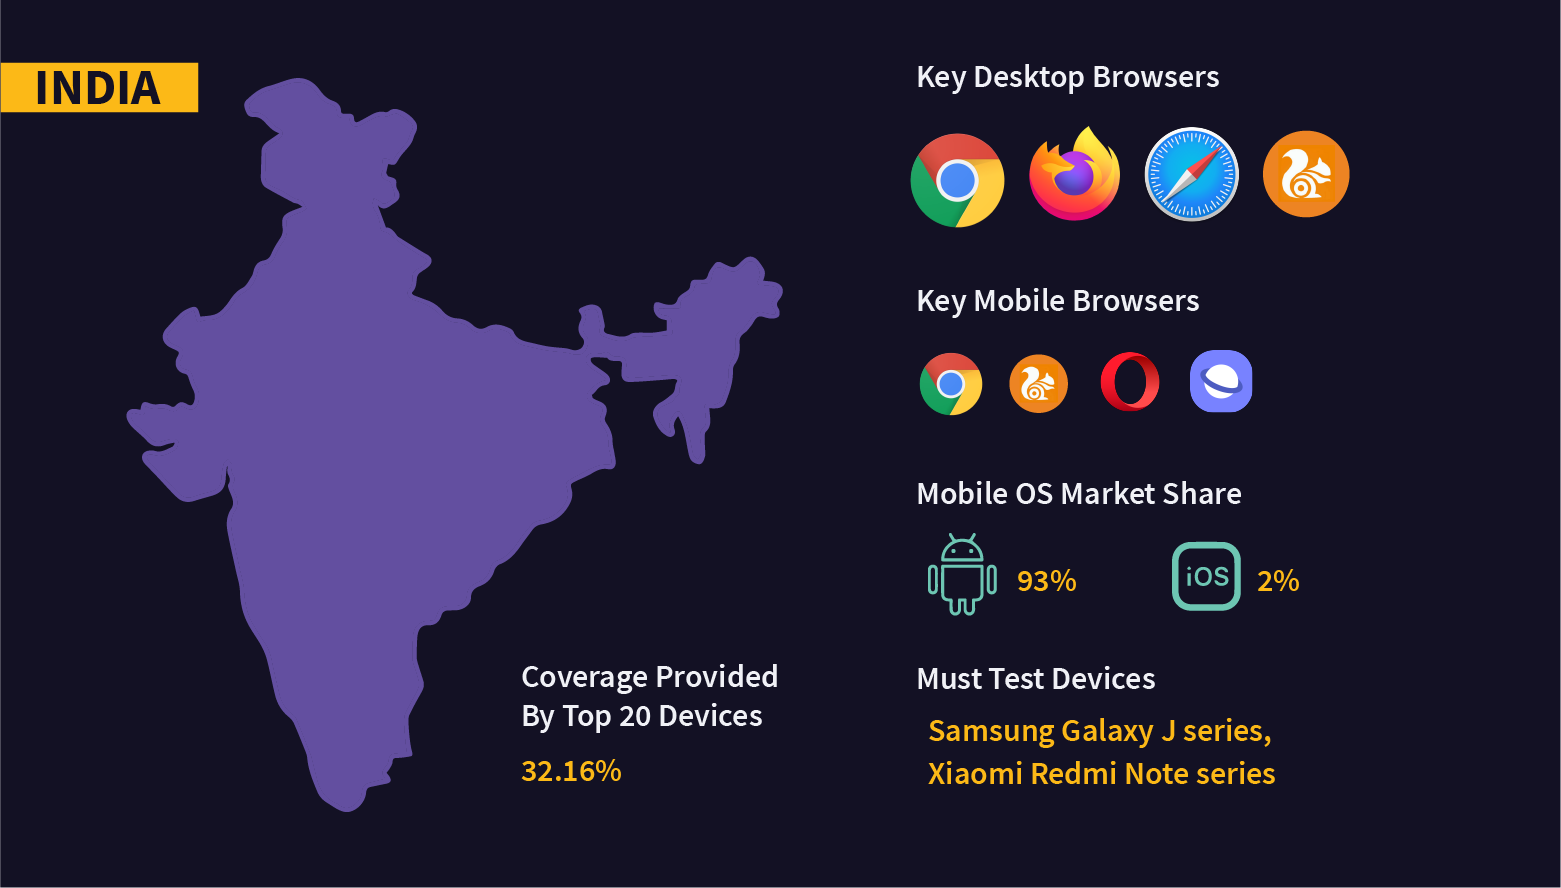 Fragmentation in OS, browsers, and devices in India